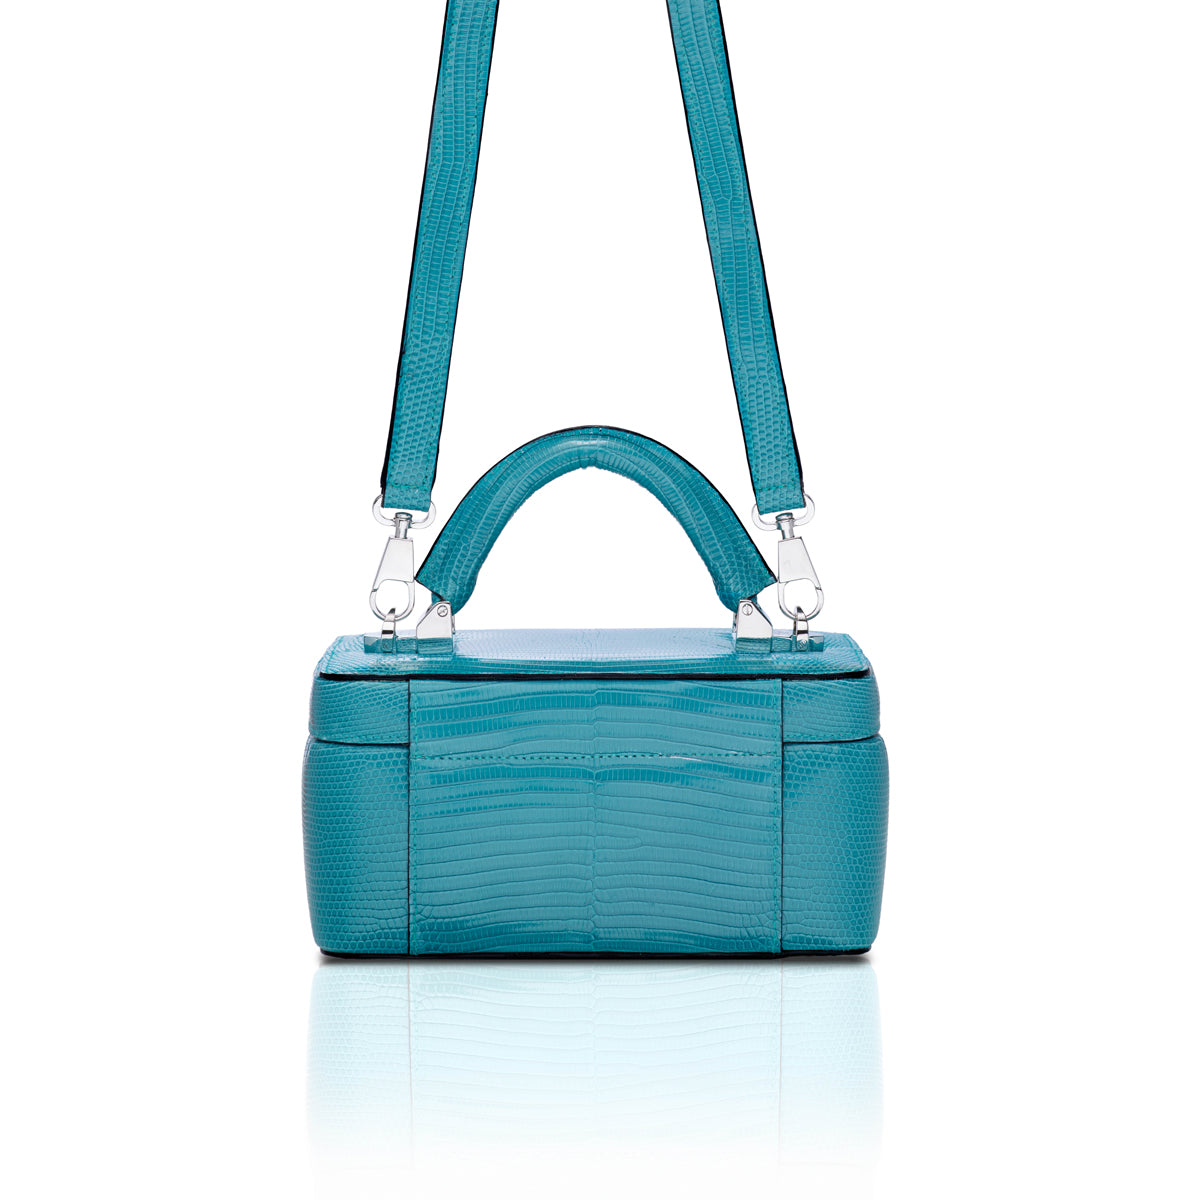 STALVEY Beauty Case in Teal Lizard Front View